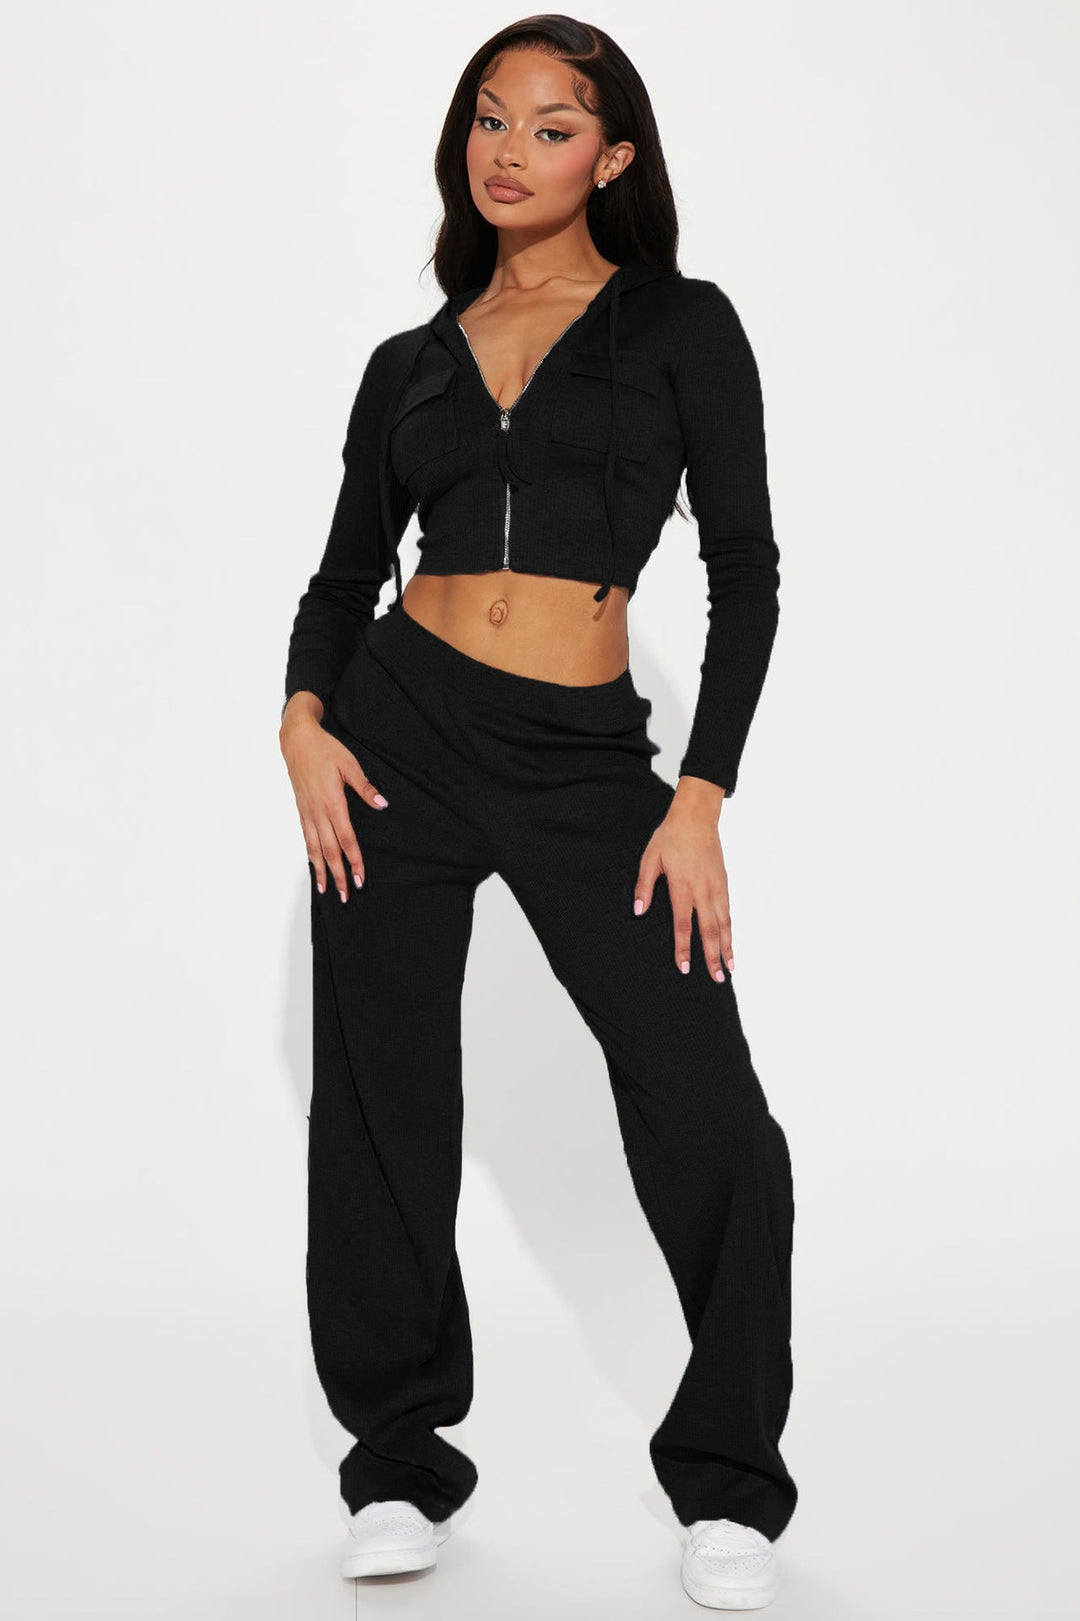 Ultra-flattering Look Hooded Crop Top and Pants Tracksuits 